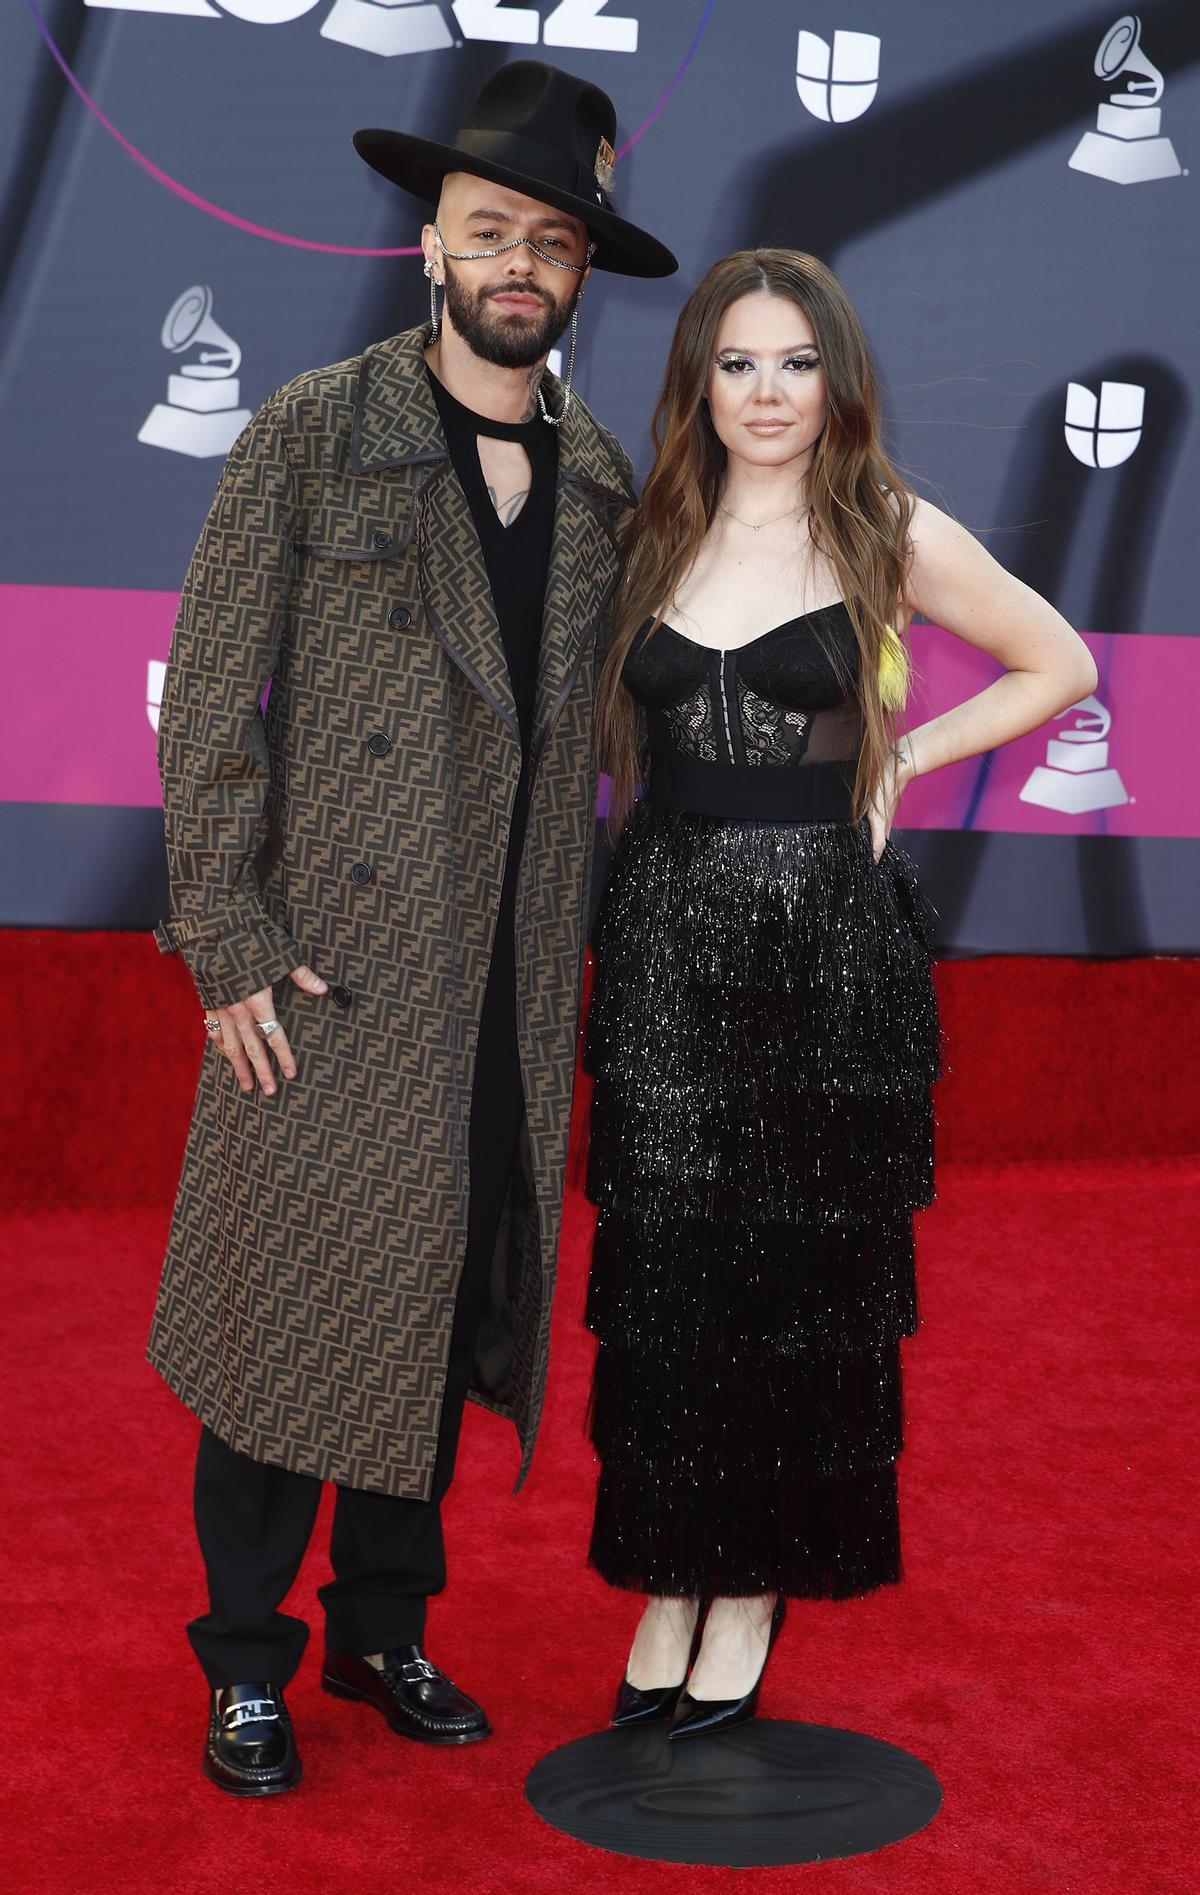 Las Vegas (United States), 17/11/2022.- Jesse Eduardo Huerta Uecke (L) and Tirzah Joy Huerta Uecke (R) of Jesse and Joy, arrive on the red carpet prior to the 23rd Annual Latin Grammy Awards at the Michelob Ultra Arena at Mandalay Bay in Las Vegas, Nevada, USA, 17 November 2022. The Latin Grammys recognize artistic and/or technical achievement, not sales figures or chart positions, and the winners are determined by the votes of their peers - the qualified voting members of the Latin Recording Academy. (Estados Unidos) EFE/EPA/CAROLINE BREHMAN